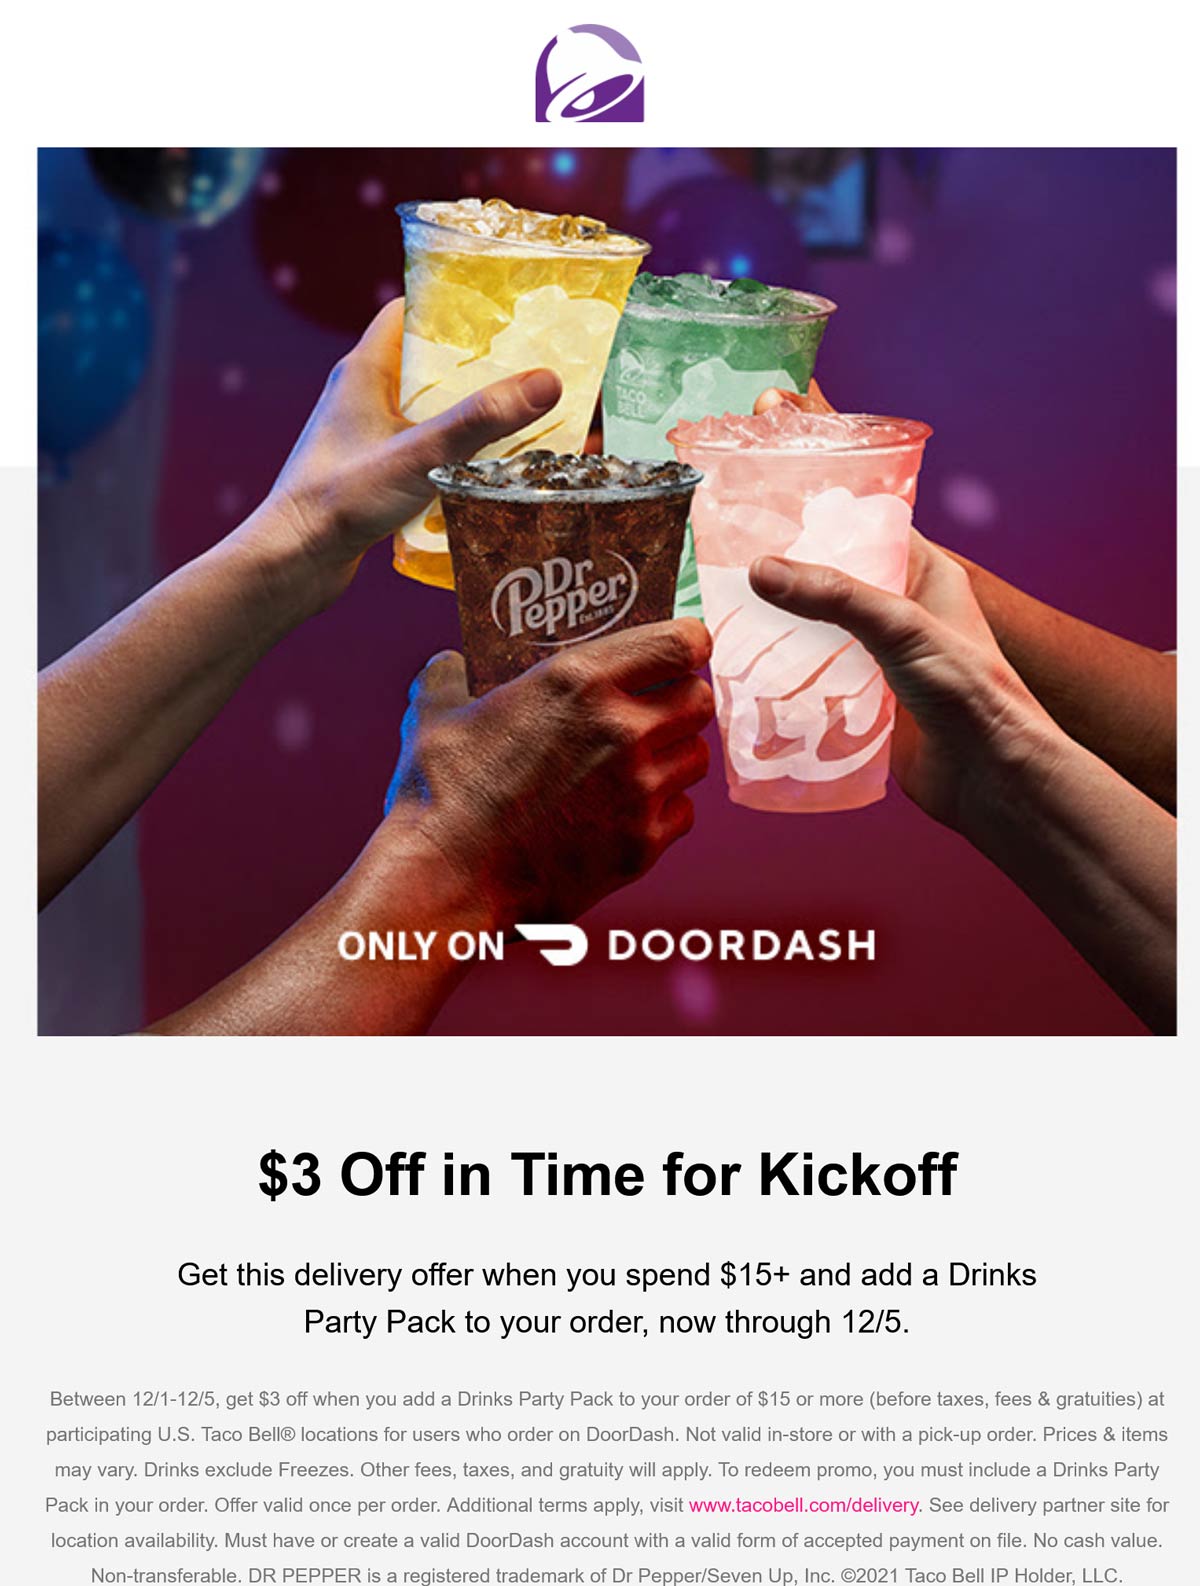 Taco Bell restaurants Coupon  $3 off $15 with drinks party pack delivery at Taco Bell #tacobell 